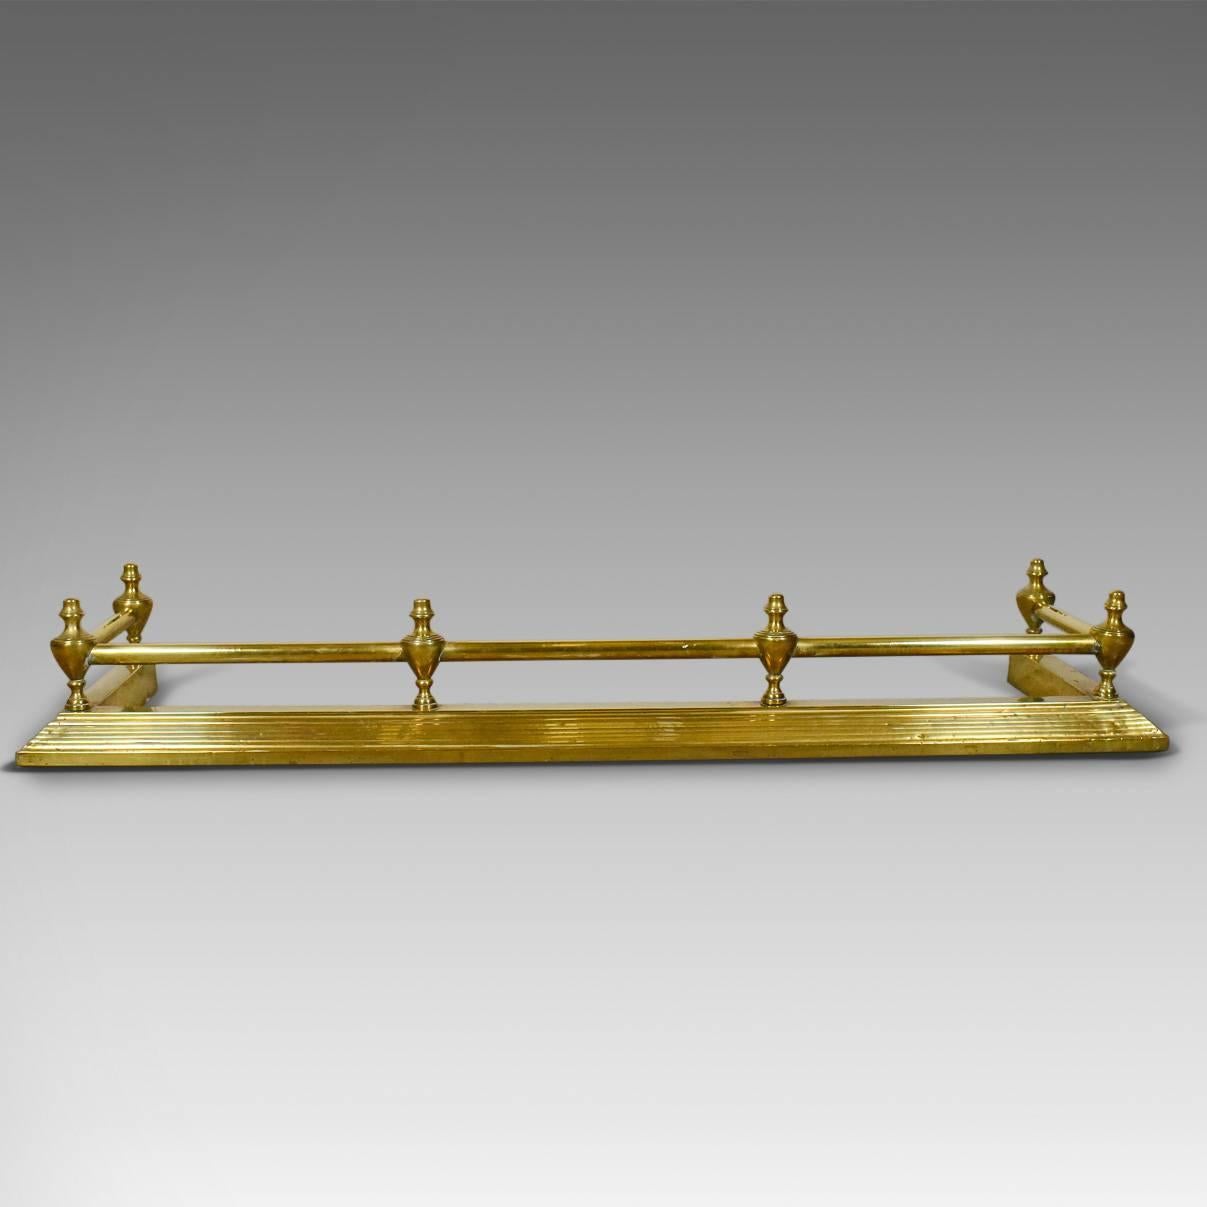 This is an antique brass fire kerb, Victorian fireside fender, English, circa 1880.

Attractive fire kerb with classical overtones
The brass mellowed with an aged patina
Stepped plinth rises to gallery
Gallery bar supported by six cast urn